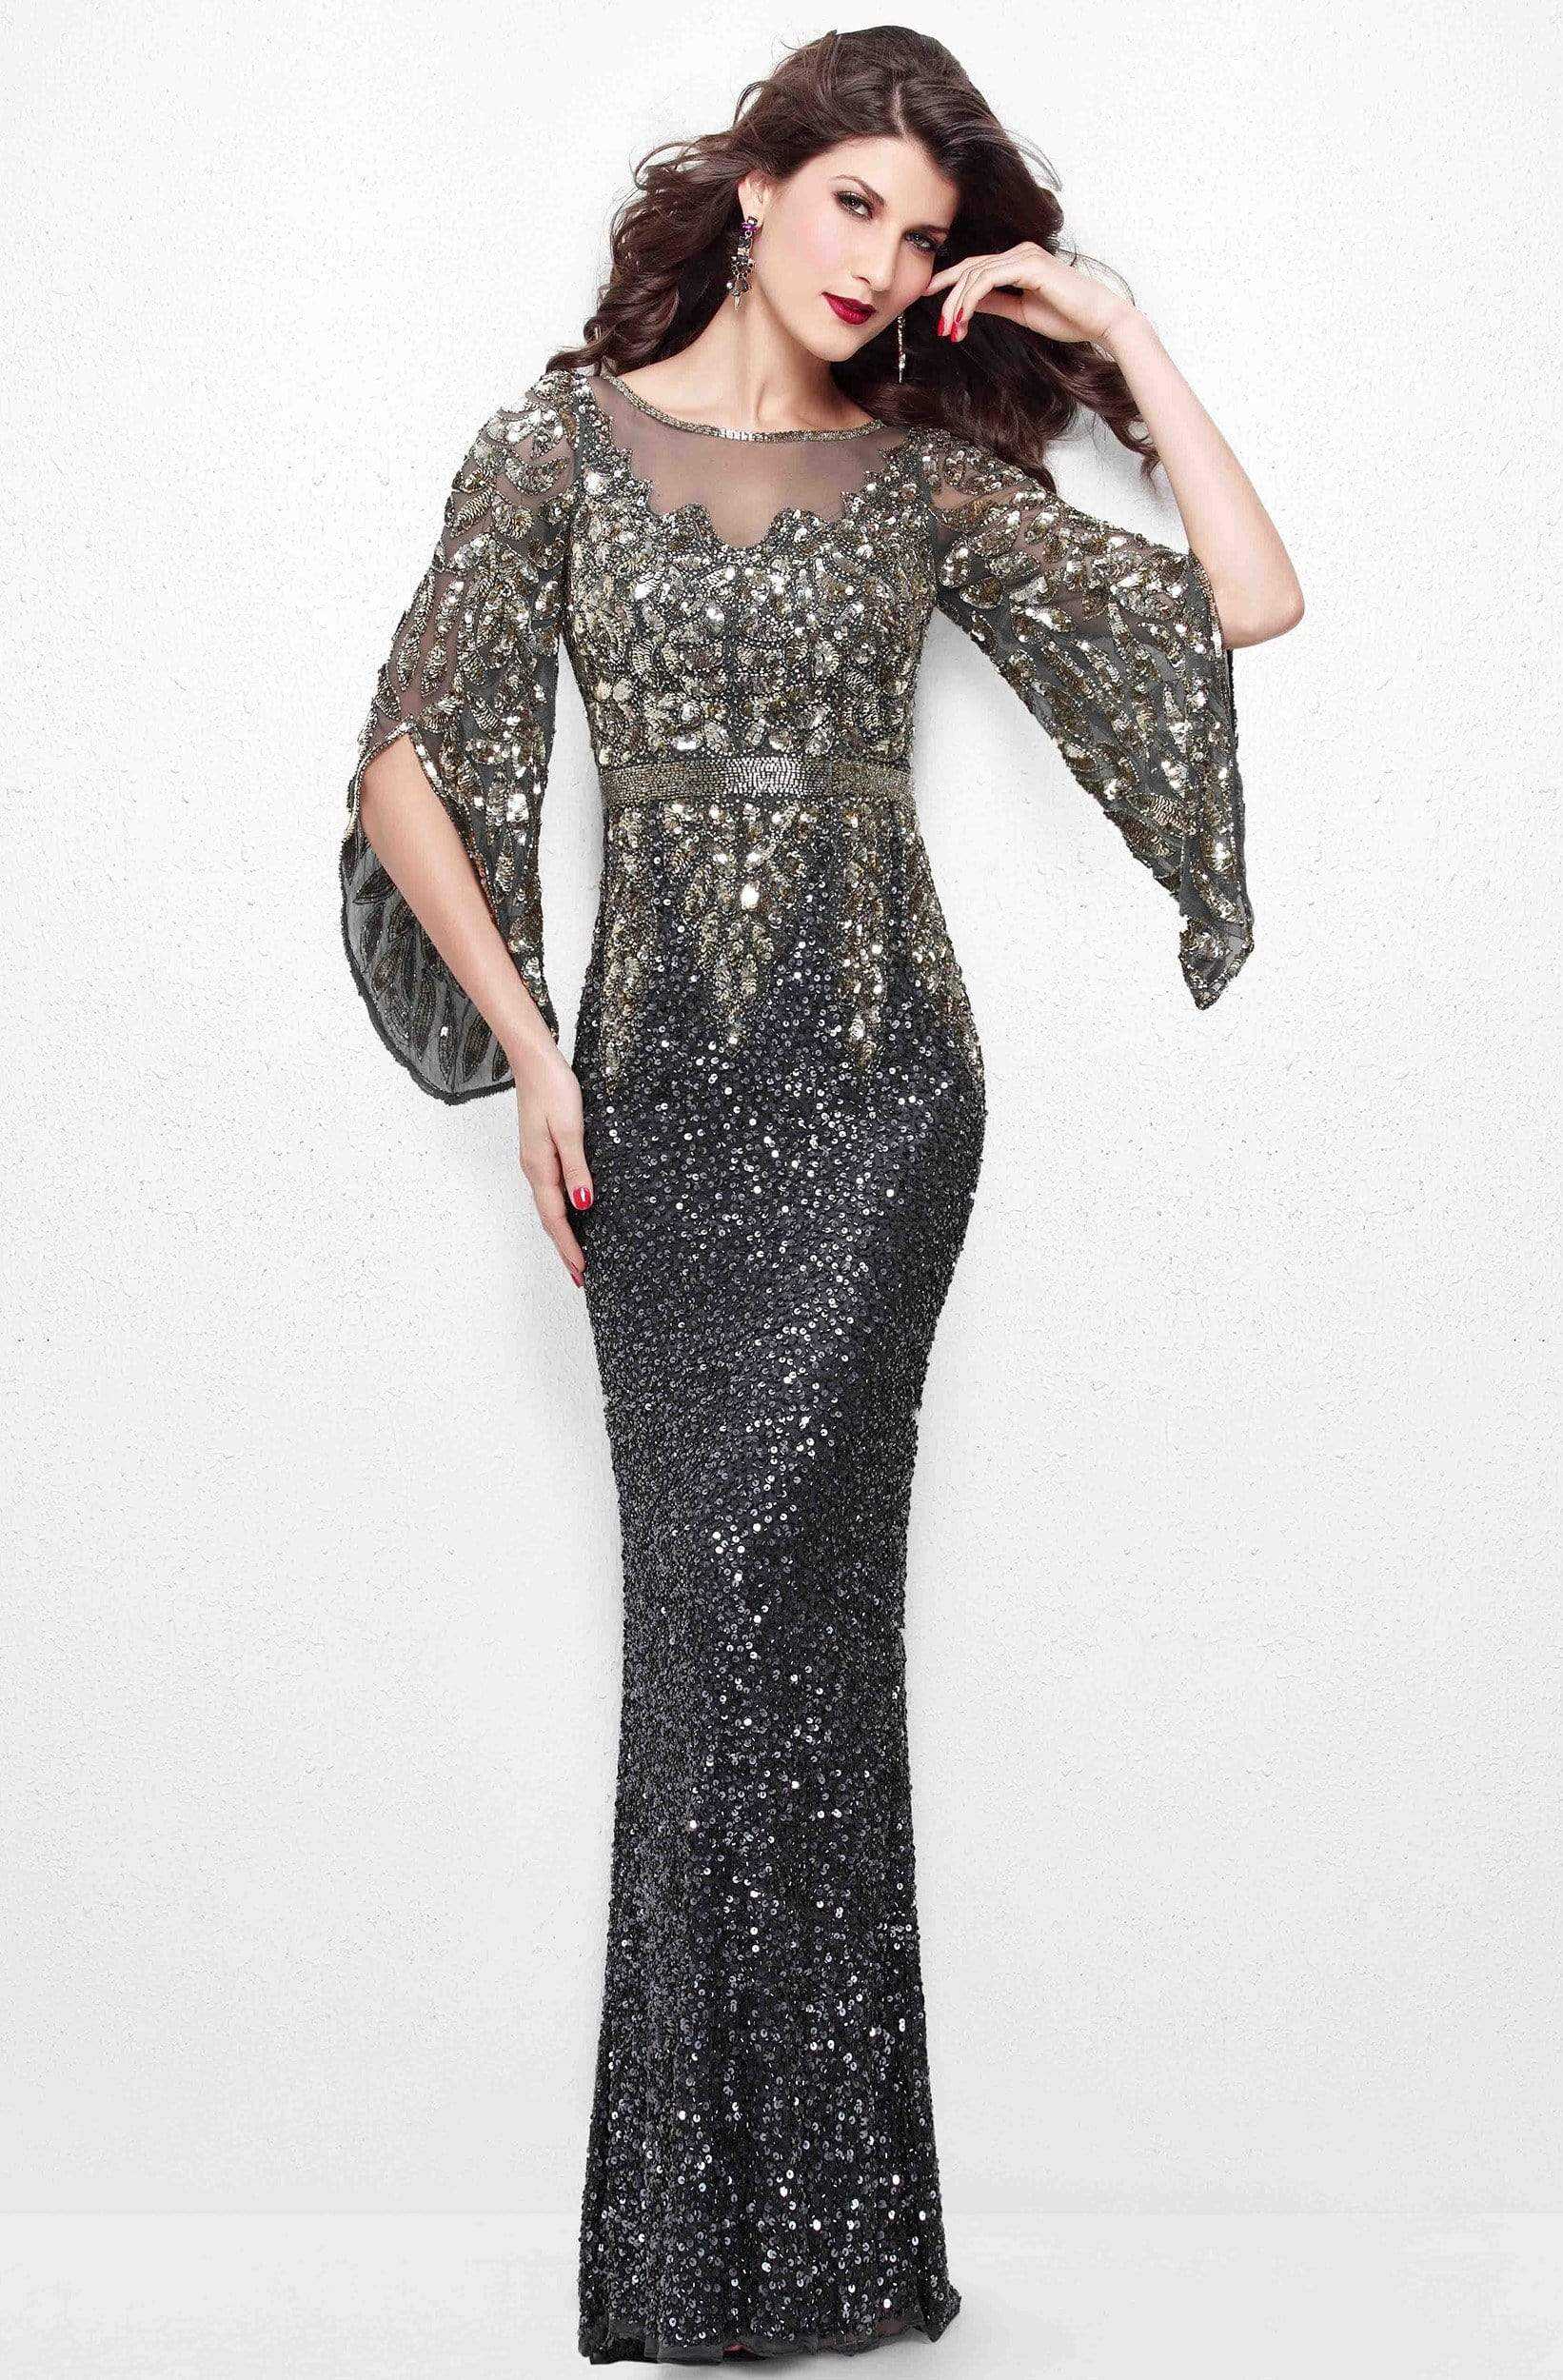 Primavera Couture, Primavera Couture - Stunning Two-Tone Sequin Embellished Long Gown with Batwing Sleeves 1424